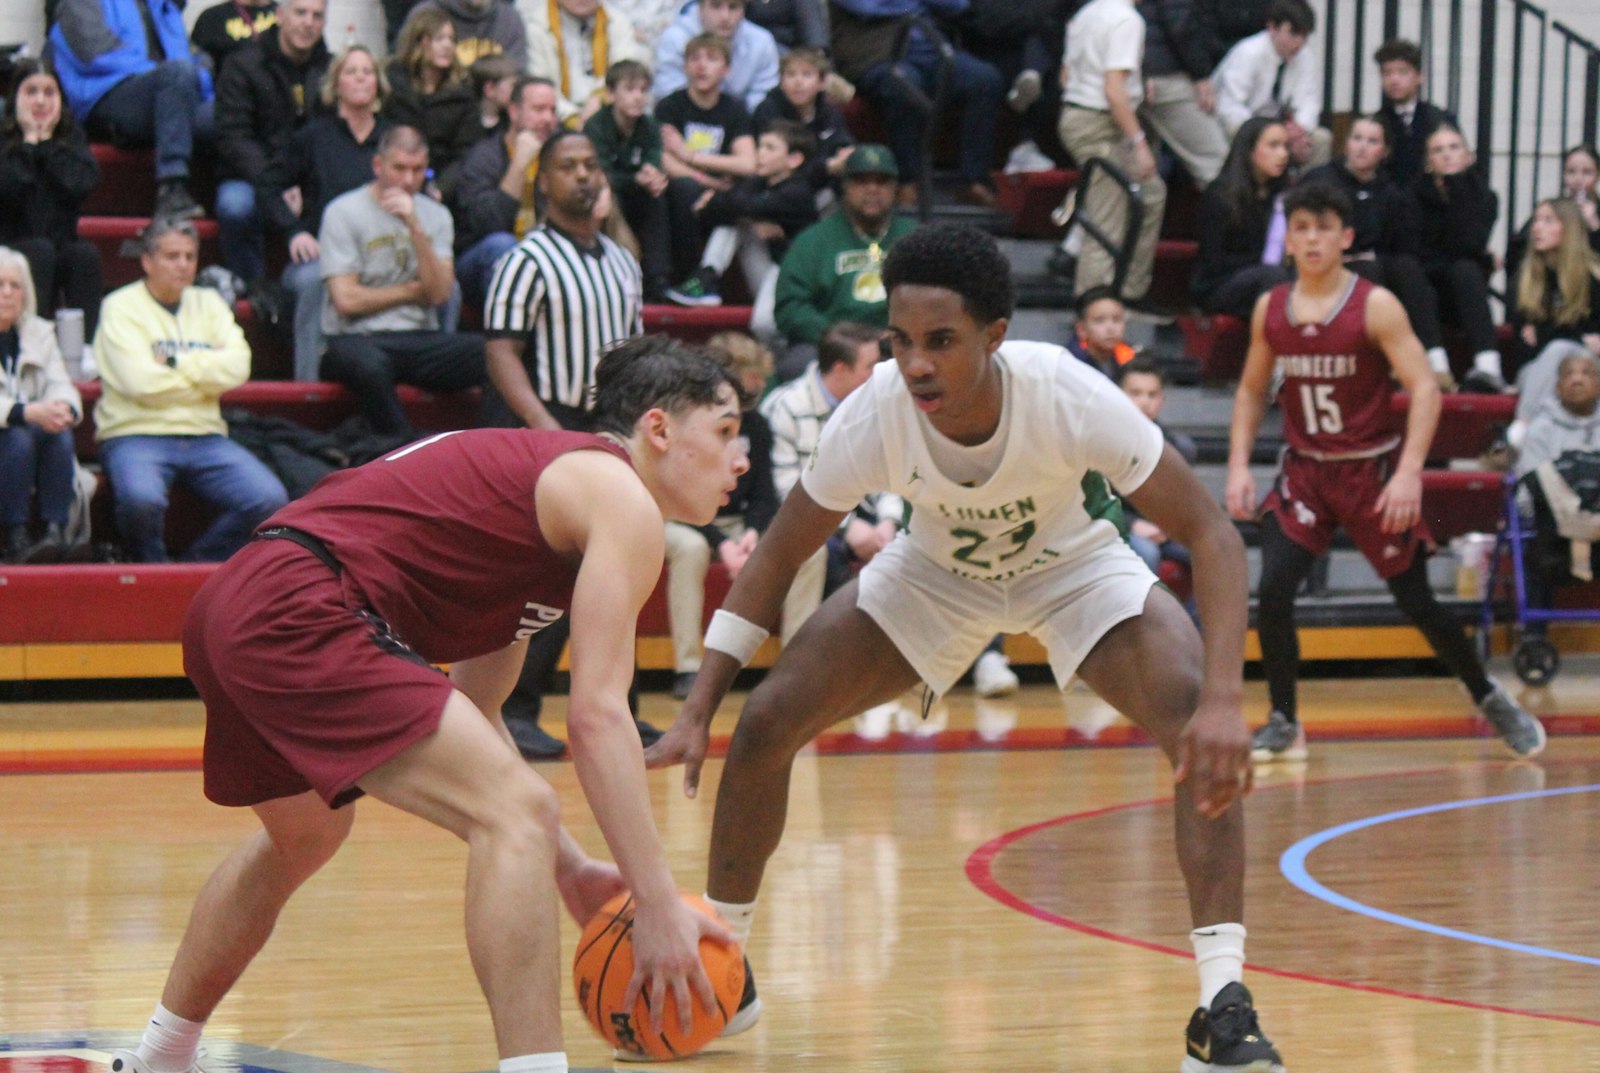 Gabriel Richard point guard Nick Sobush looks for options while being guarded by Jackson Lumen Christi’s Lunden Hampton.